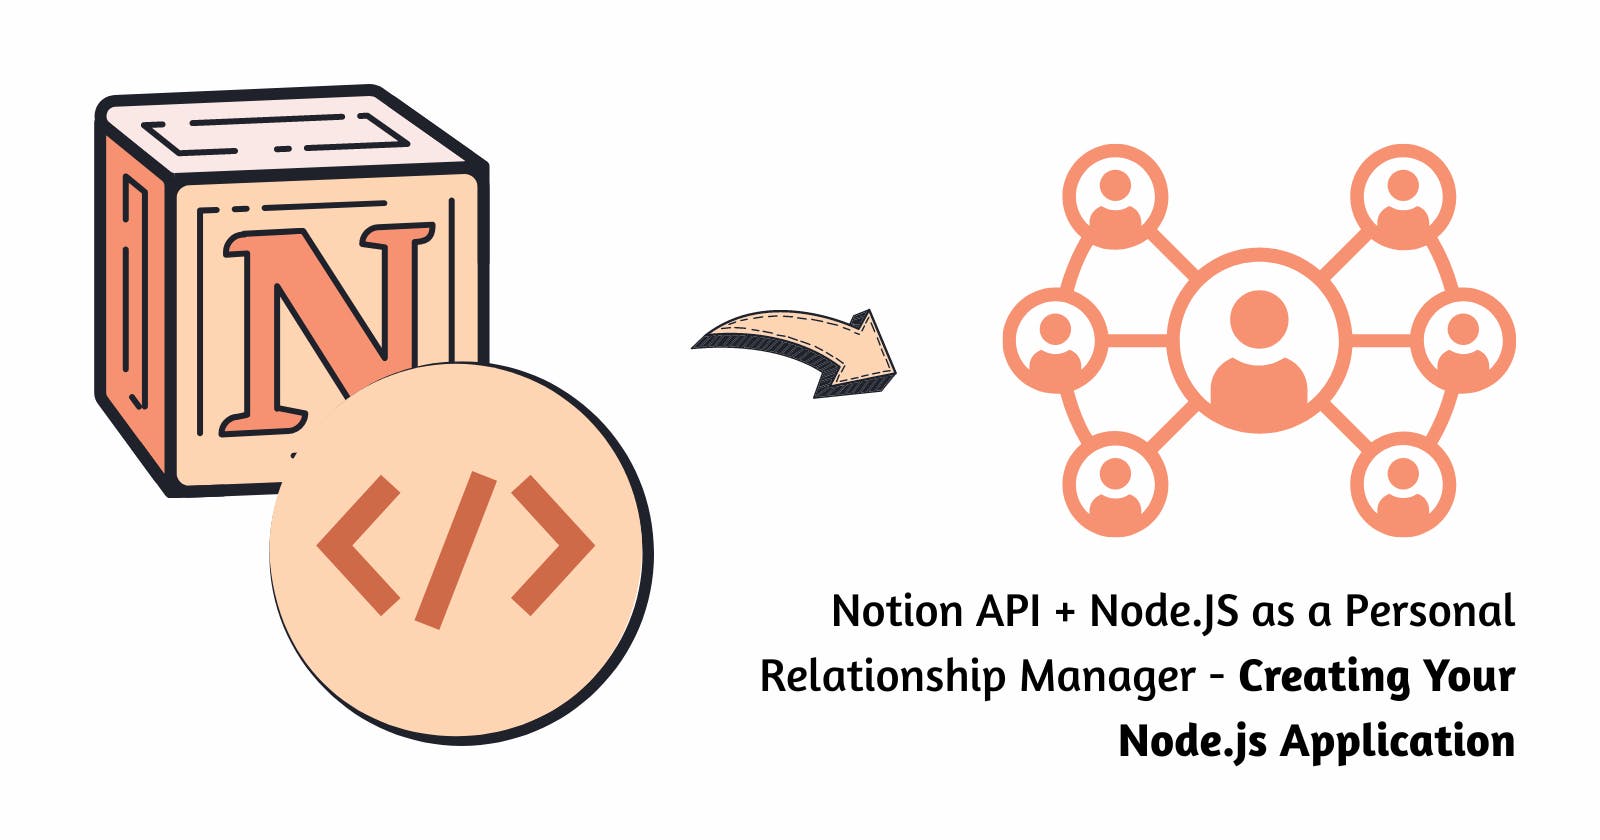 Building a (Personal) Relationship Manager with Notion API - Creating Your Node.js Application.